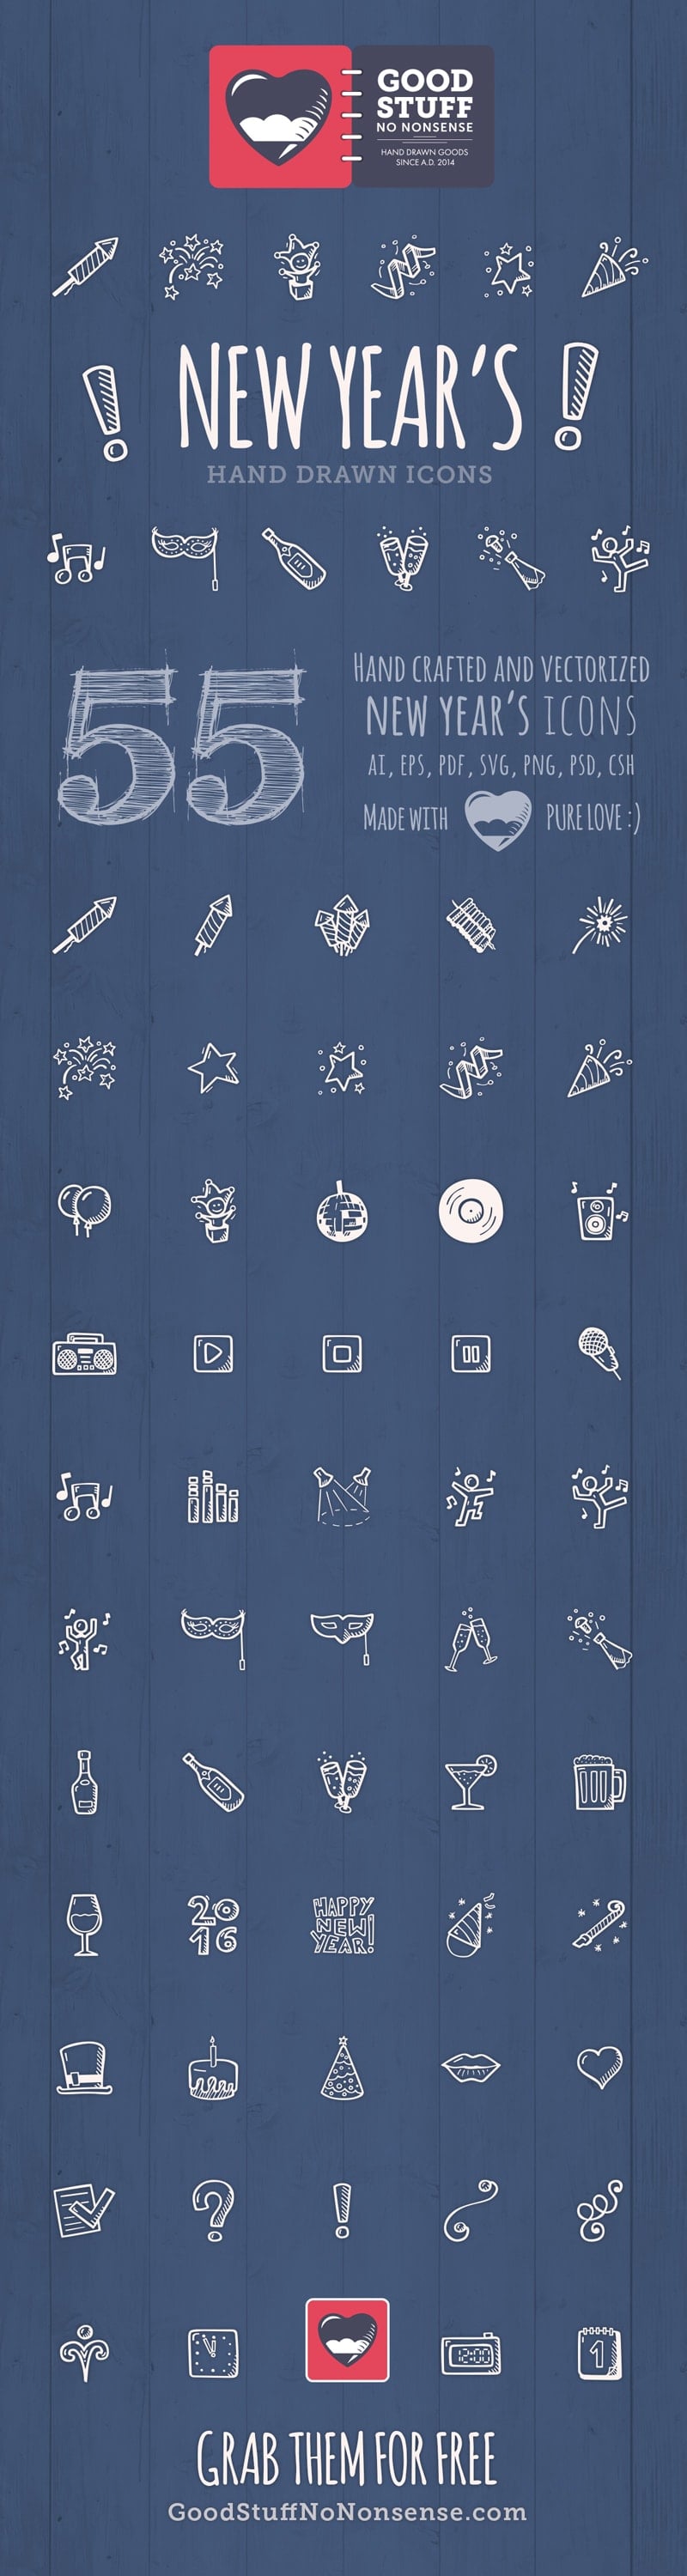 Free New Years Icons - Hand Drawn Icons